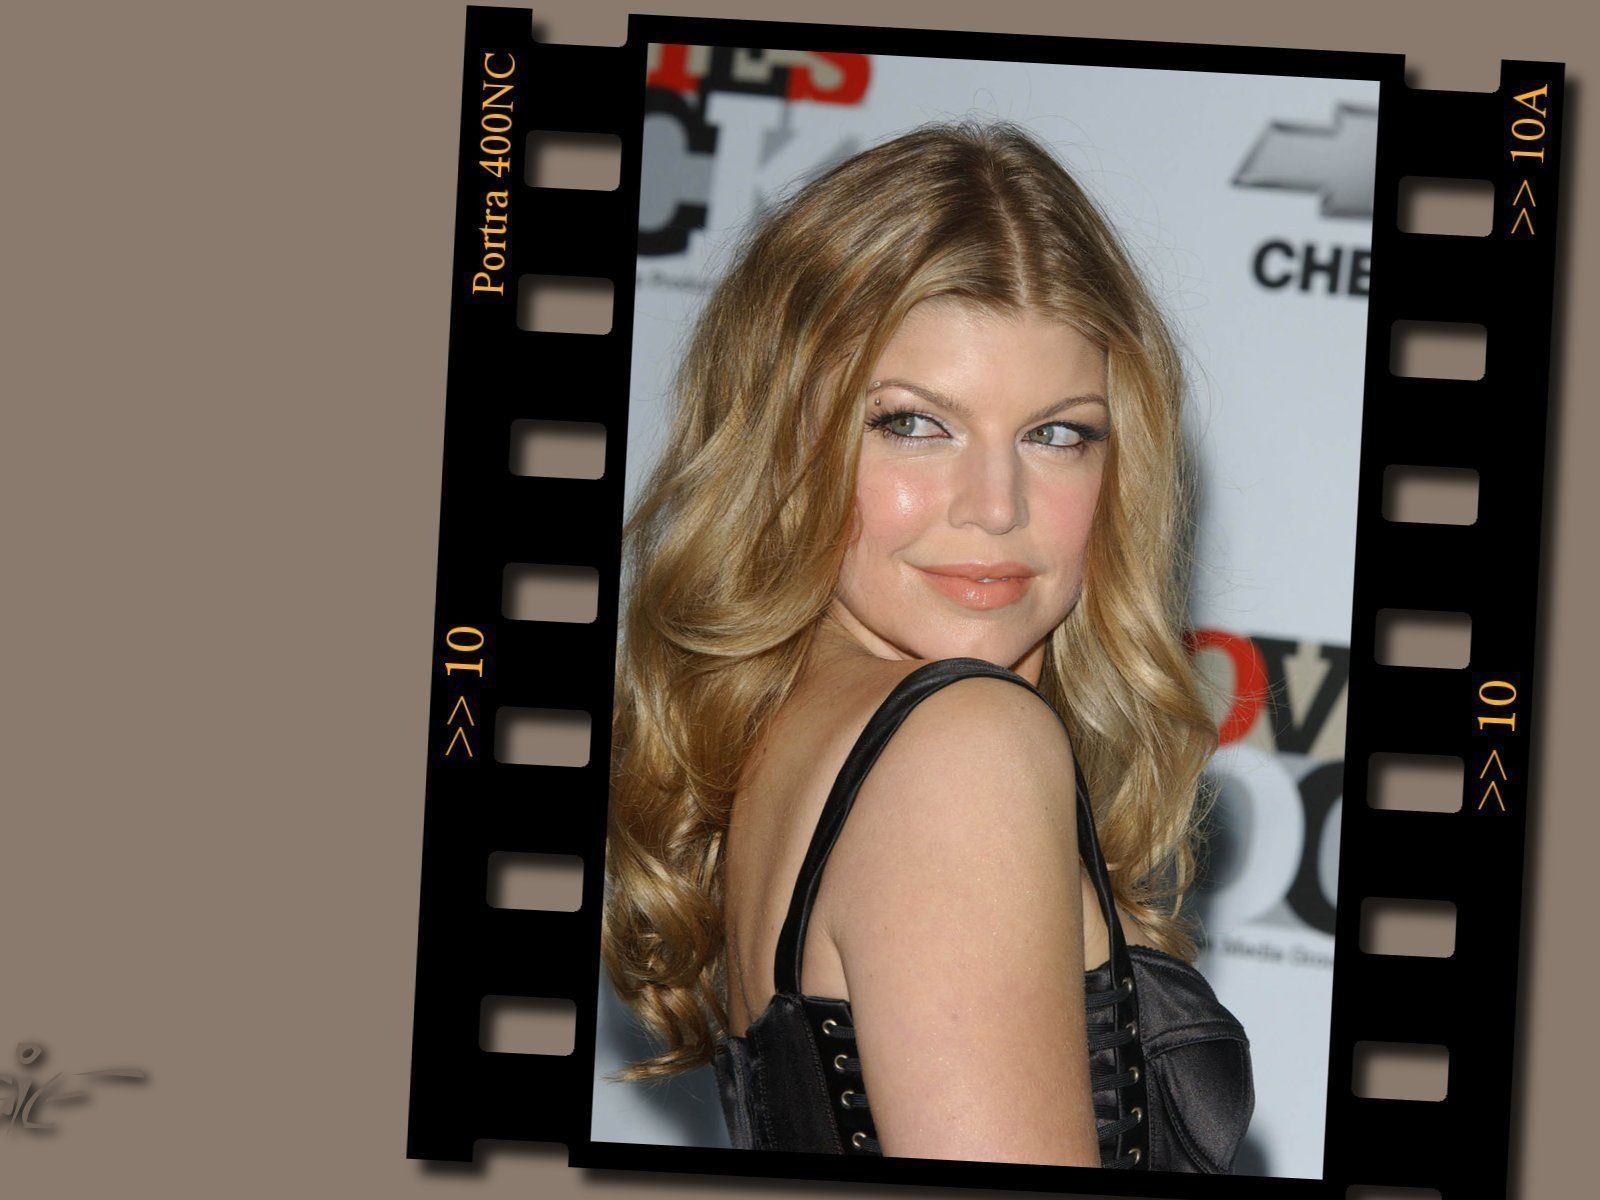 Fergie #006 - 1600x1200 Wallpapers Pictures Photos Images